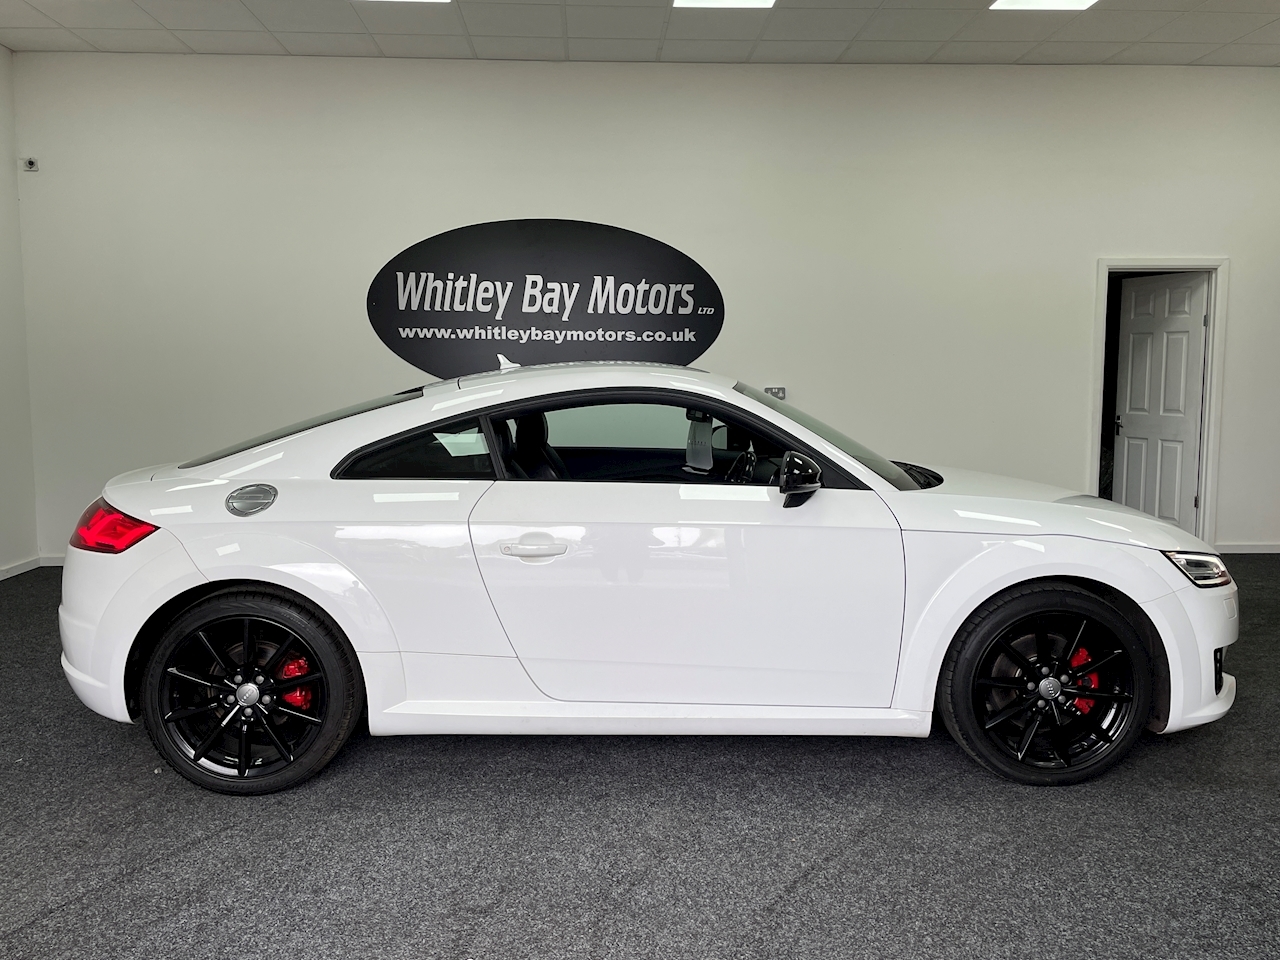 TT 1.8 TFSI Sport Coupe 3dr Petrol (s/s) (180 ps)